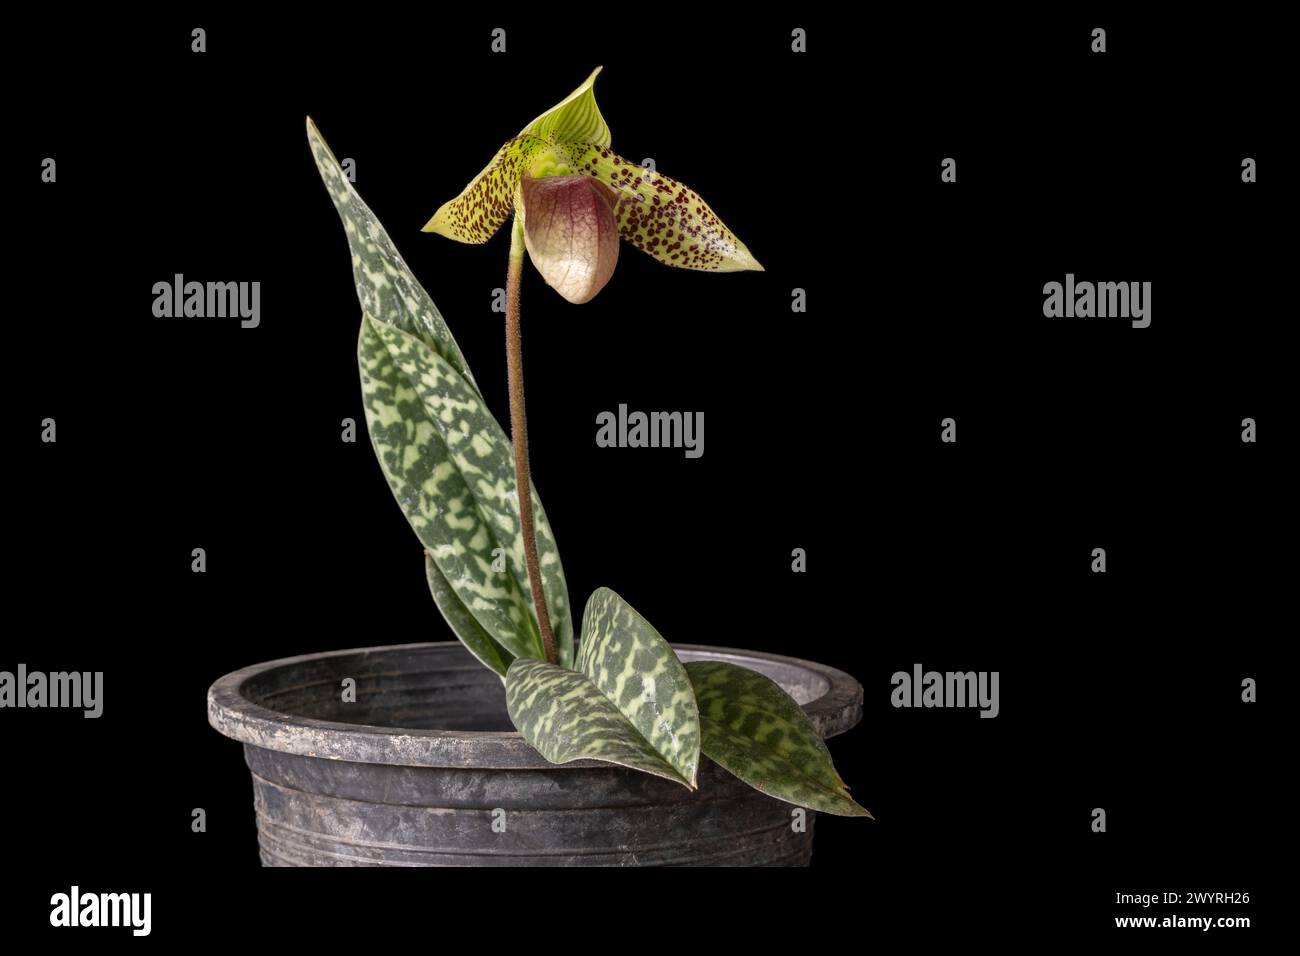 Closeup view of potted lady slipper orchid species paphiopedilum sukhakulii with purple red and green flower isolated on black background Stock Photo